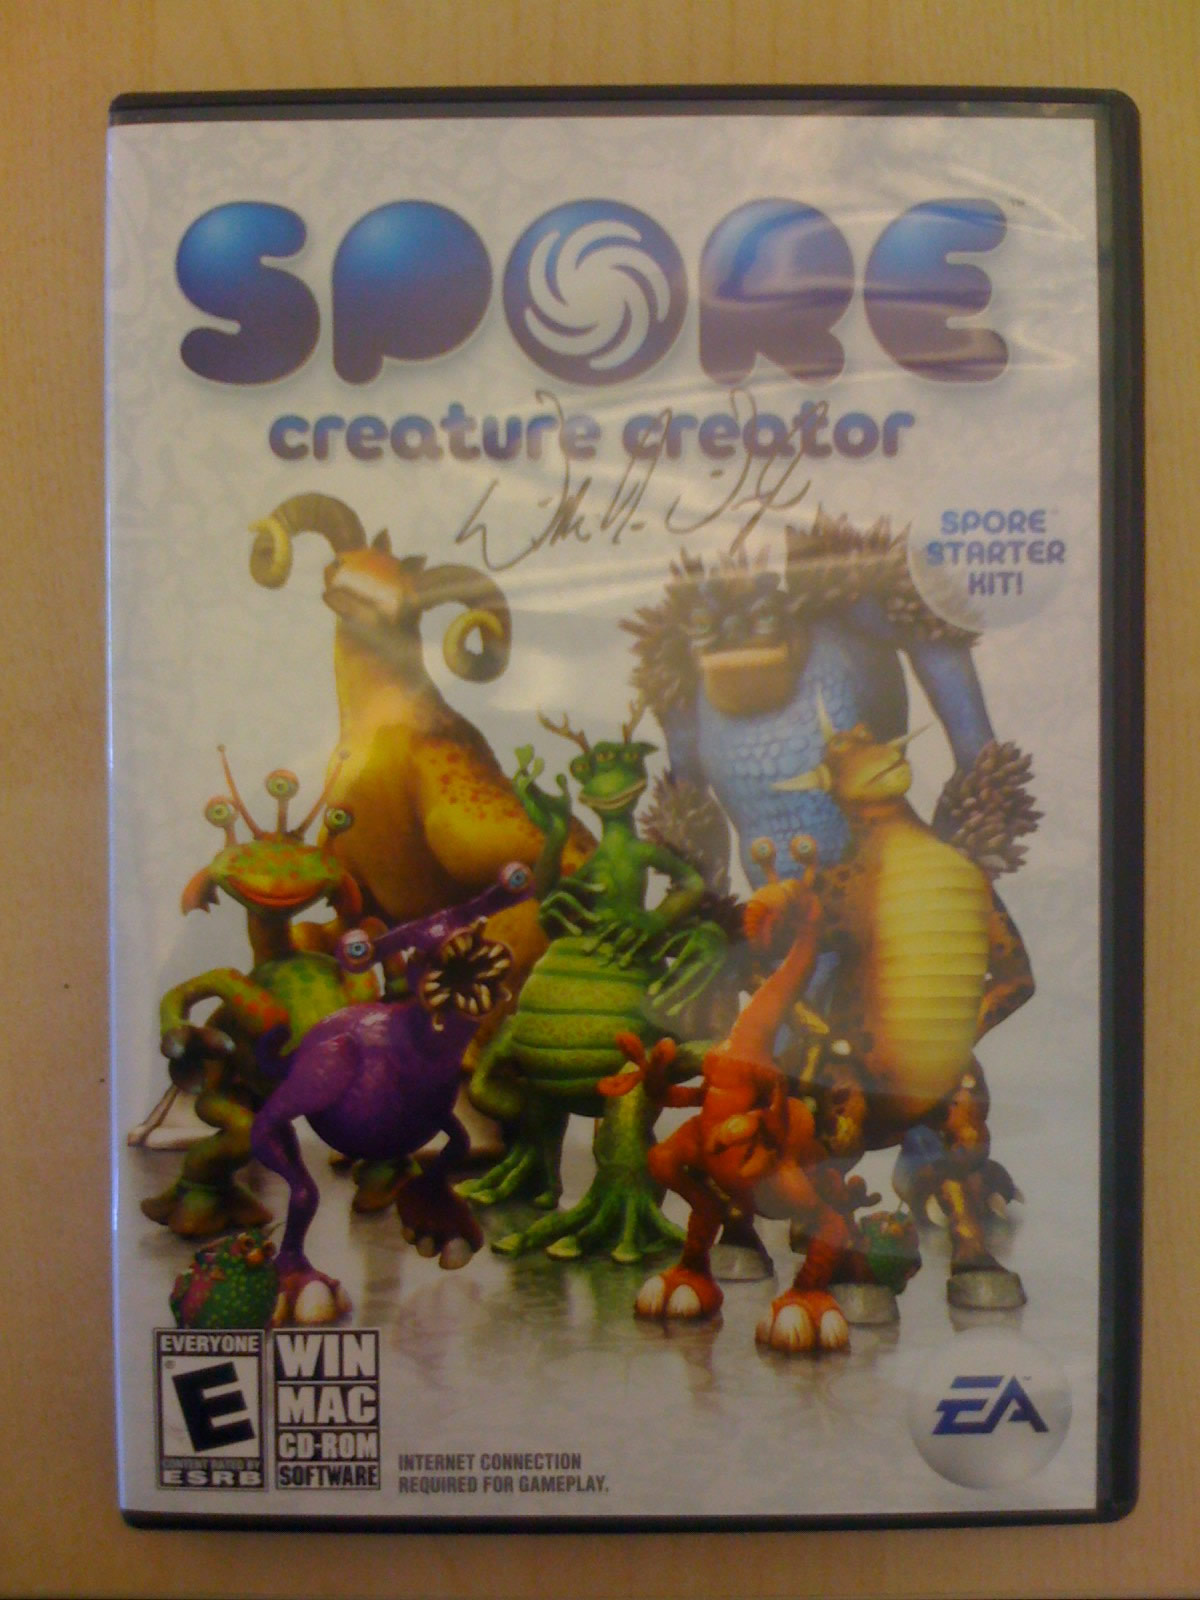 spore creator not taking other spore creations